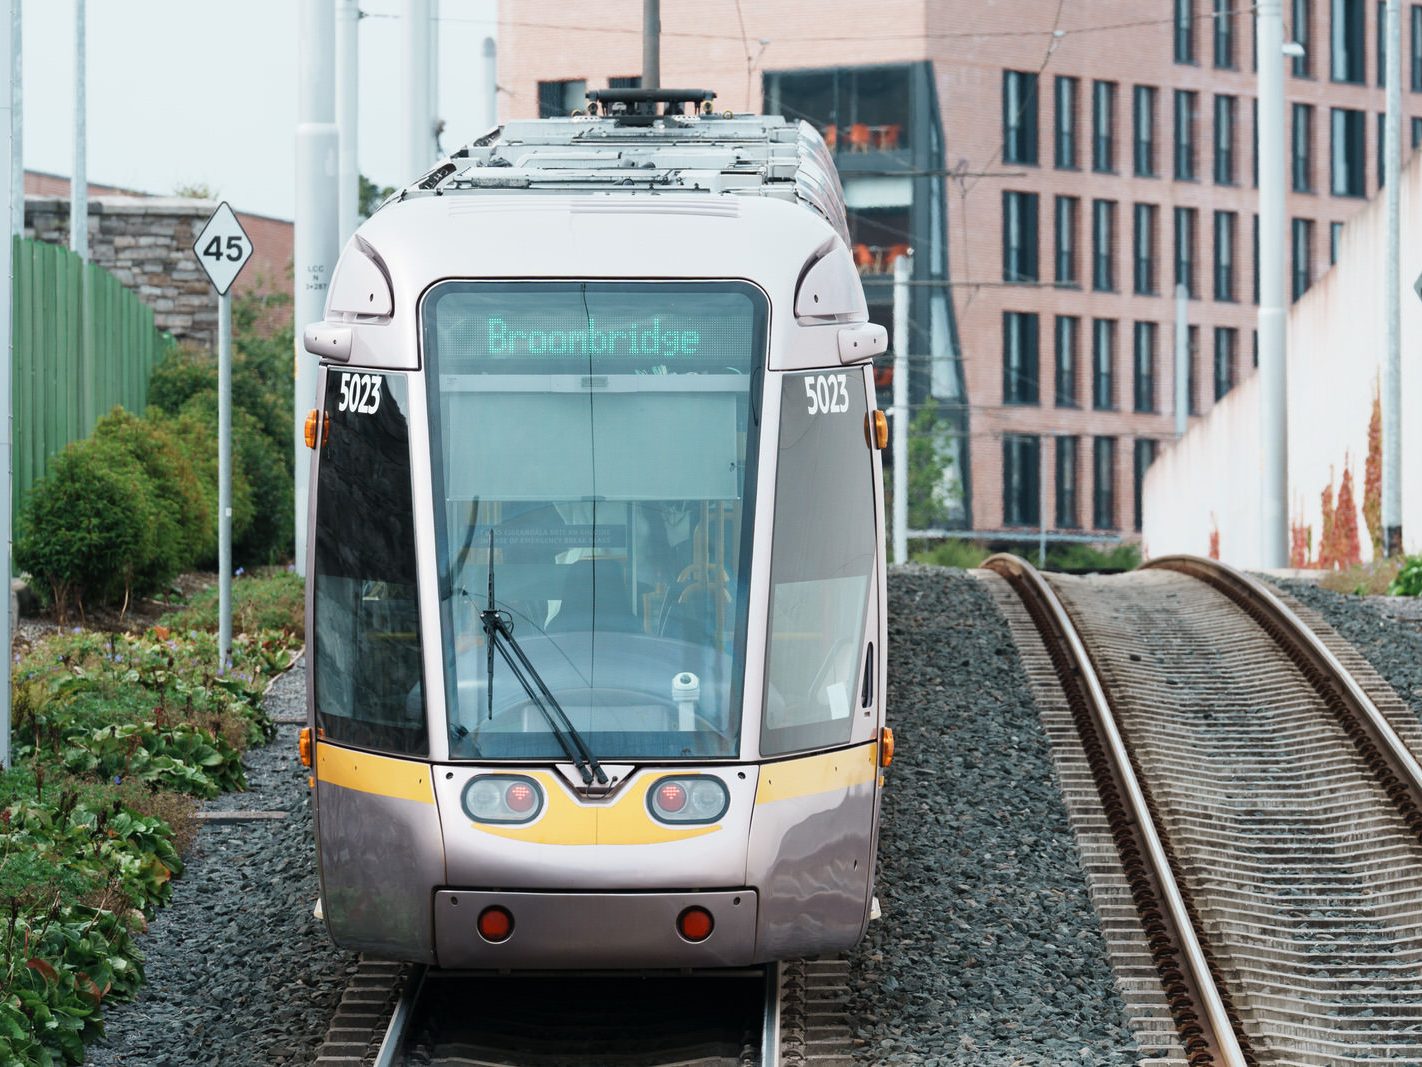 PUBLIC TRANSPORT AT BROADSTONE [RANDOM IMAGES OF LUAS TRAMS ARRIVING AND LEAVING] 007